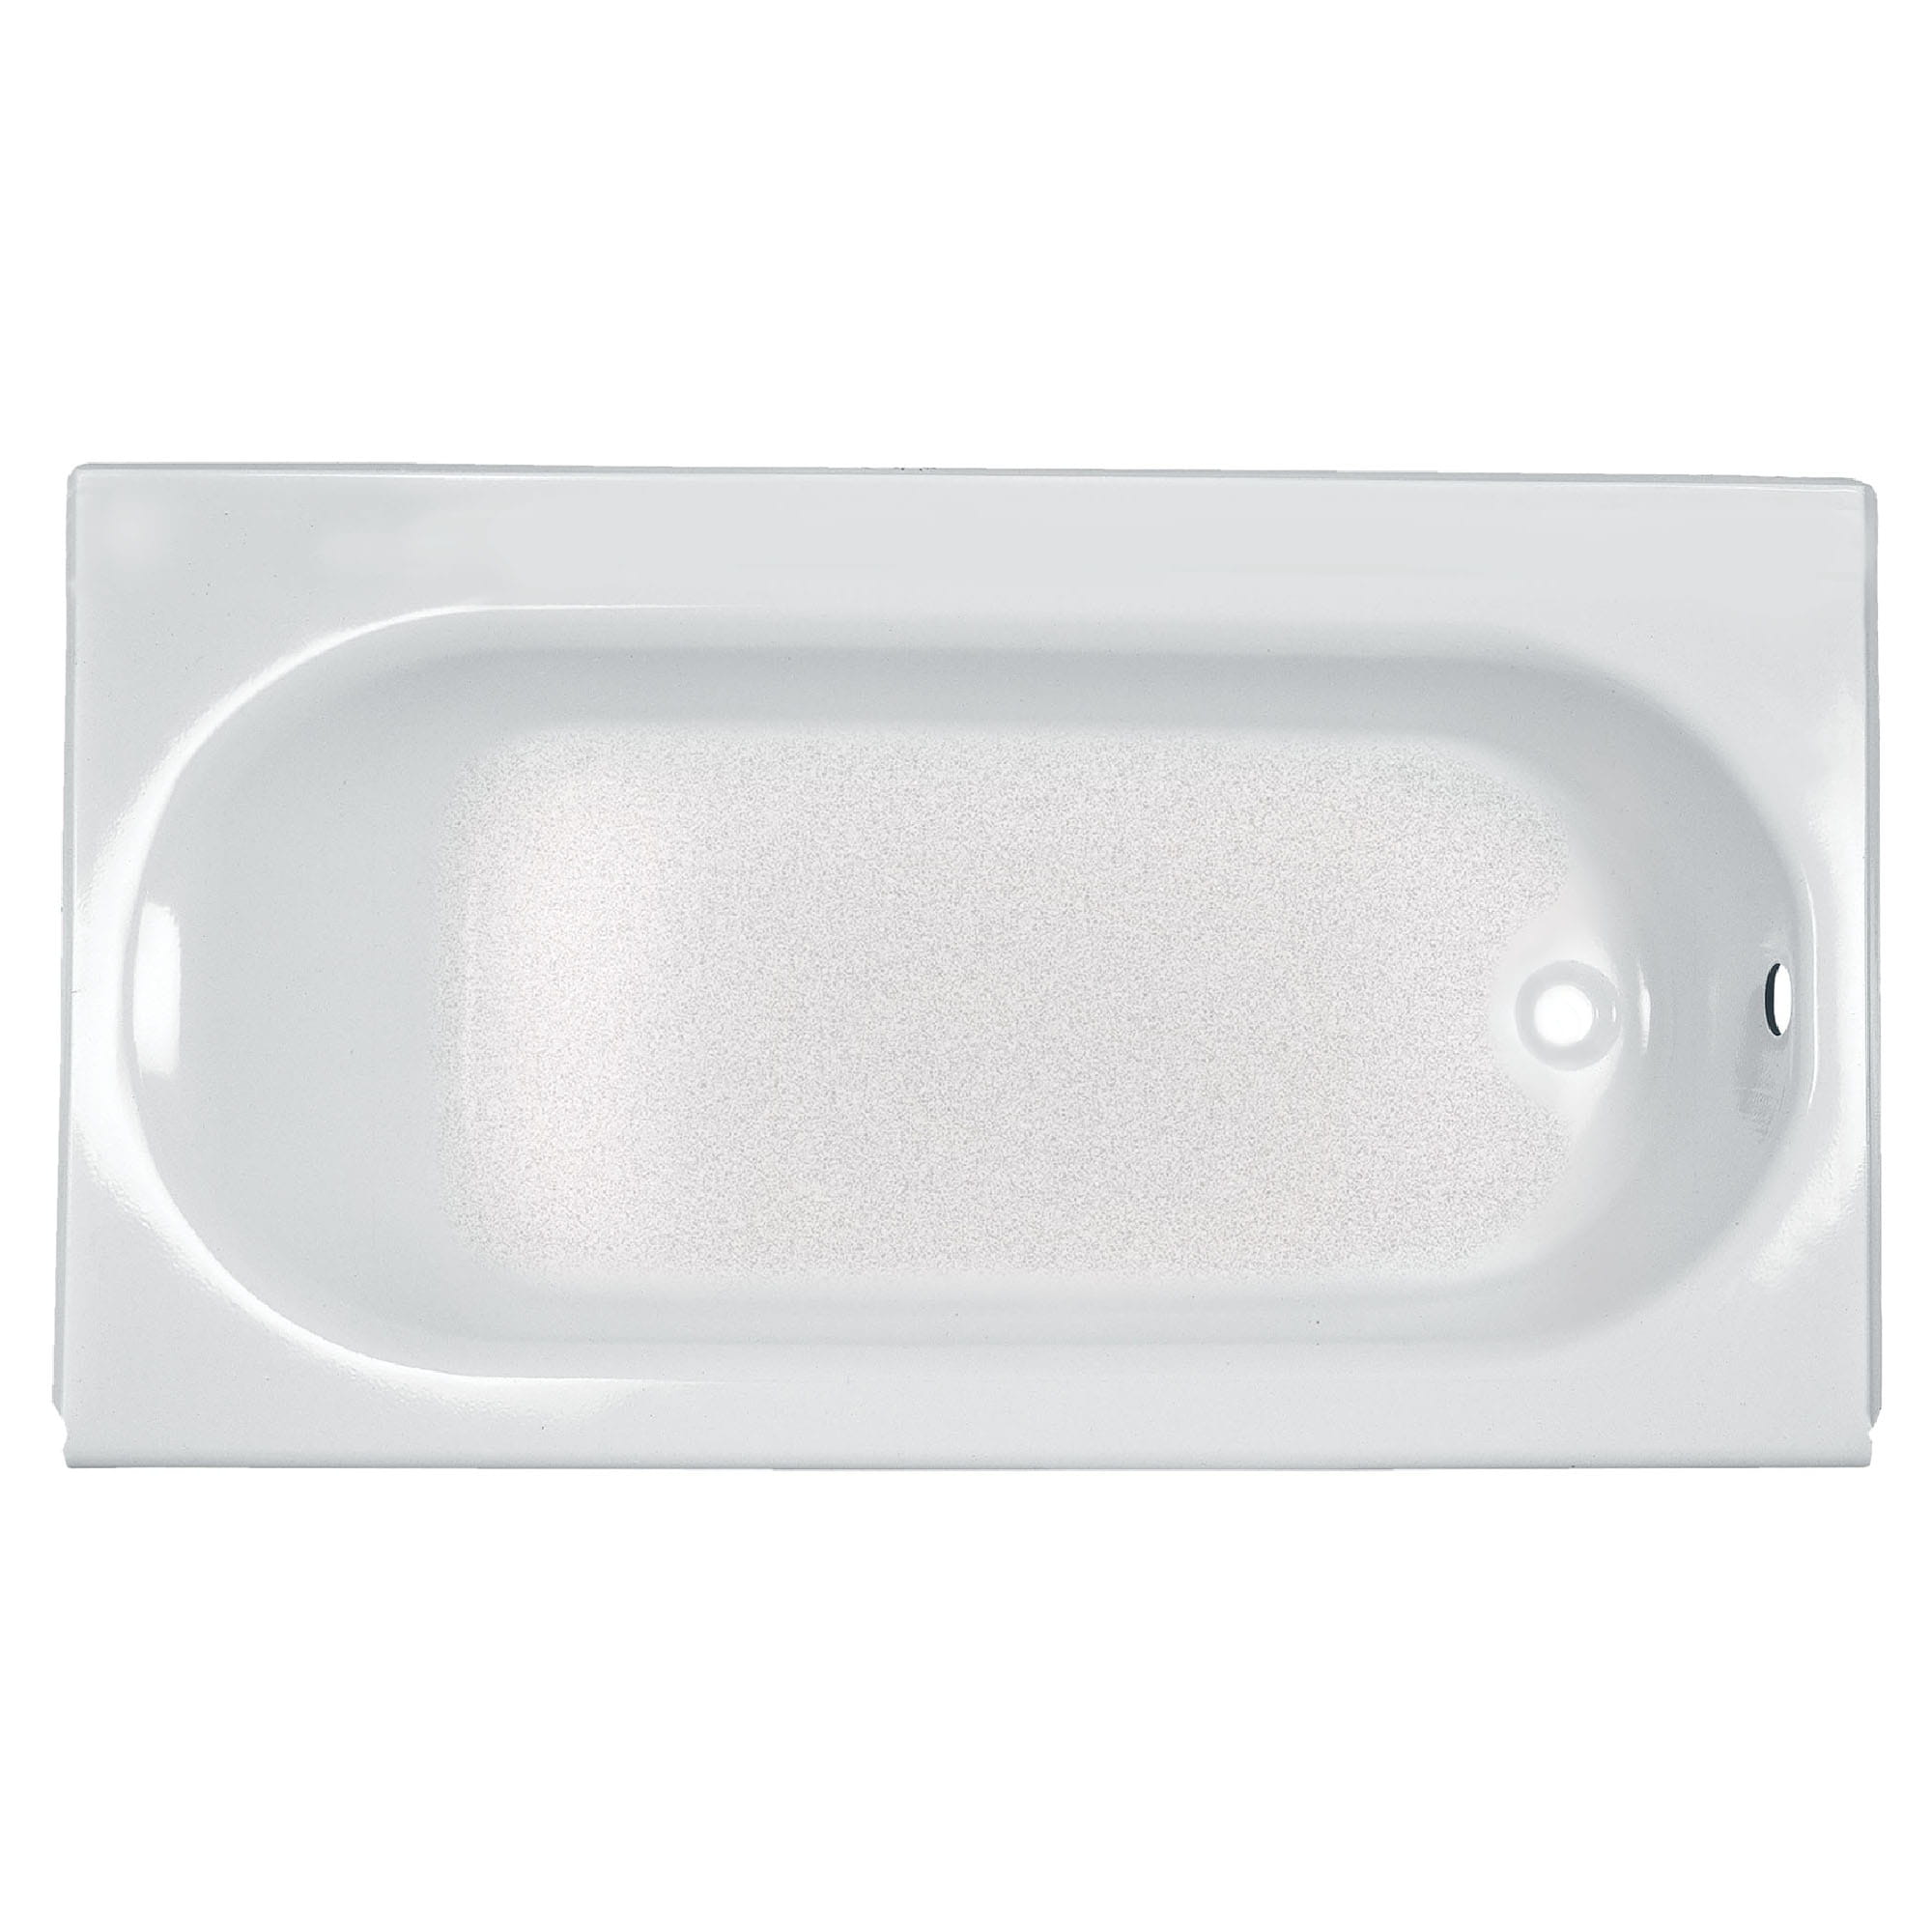 Princeton Americast 60 x 34 Inch Integral Apron Bathtub Right Hand Outlet Luxury Ledge with Integral Drain WHITE